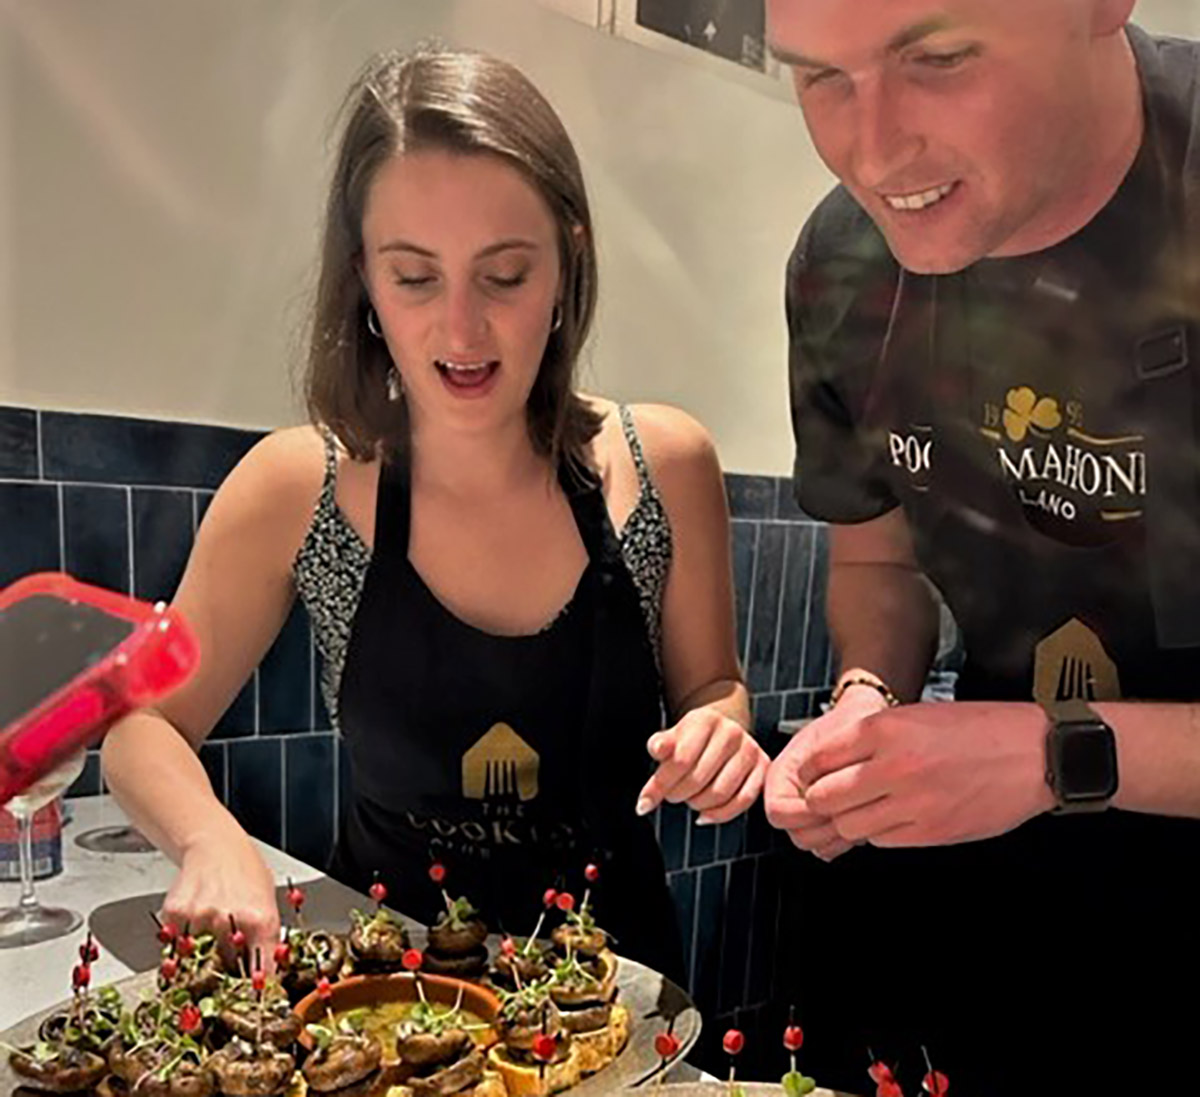 Along with a packed agenda of 14 company visits in Madrid, MBA students from Fordham Gabelli School of Business enjoyed a tapas cooking class as a woman and a man have aprons on learning how to make tapas next to each other as they glance downward at the food dishes.